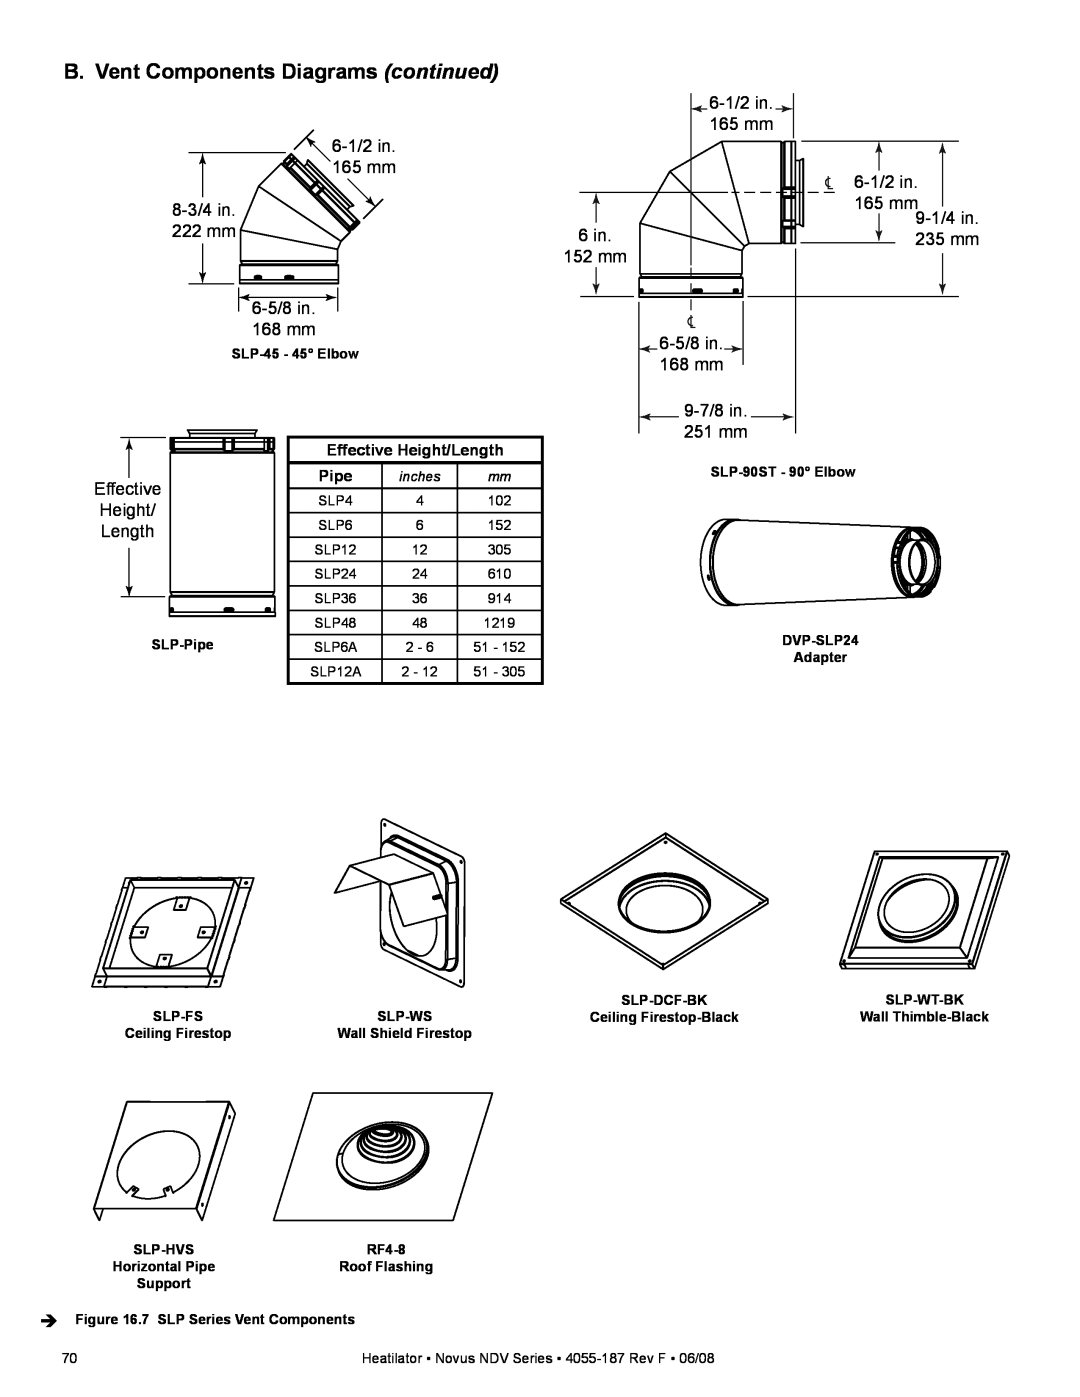 Hearth and Home Technologies NDV4842IL B. Vent Components Diagrams continued, Effective, Height, Length, Pipe, inches 